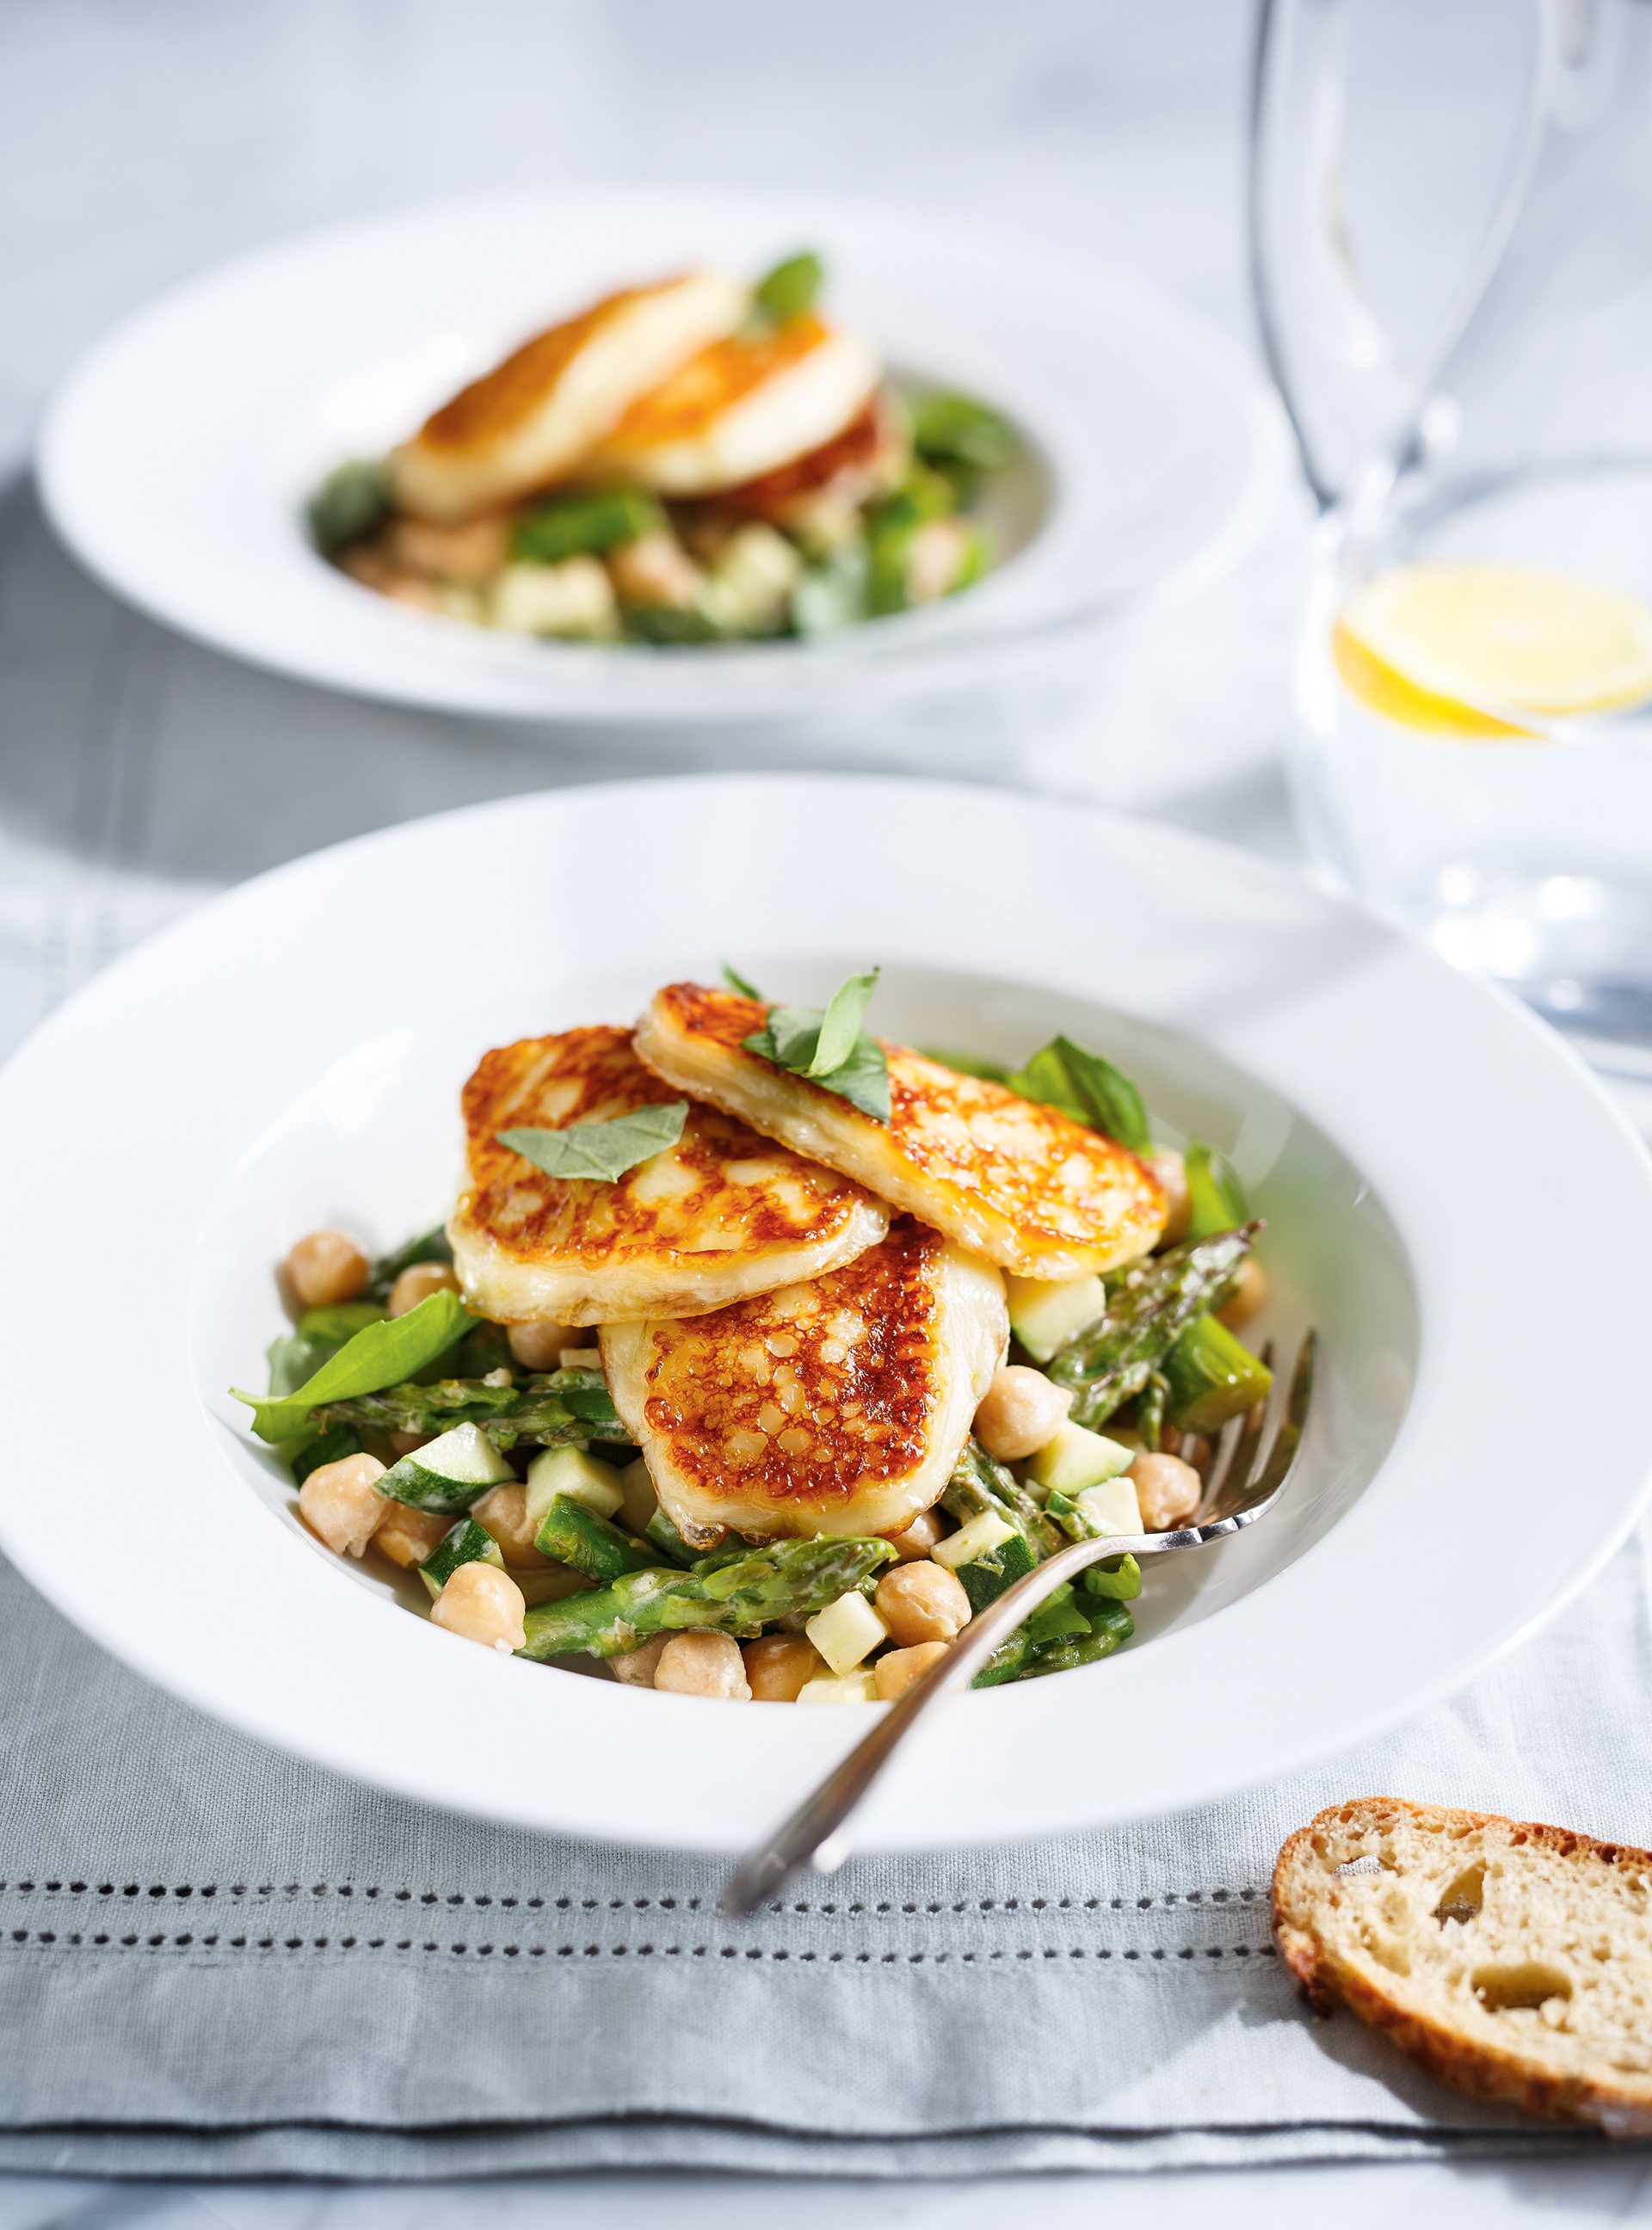 Asparagus and Chickpea Salad with Grilled Halloumi Cheese